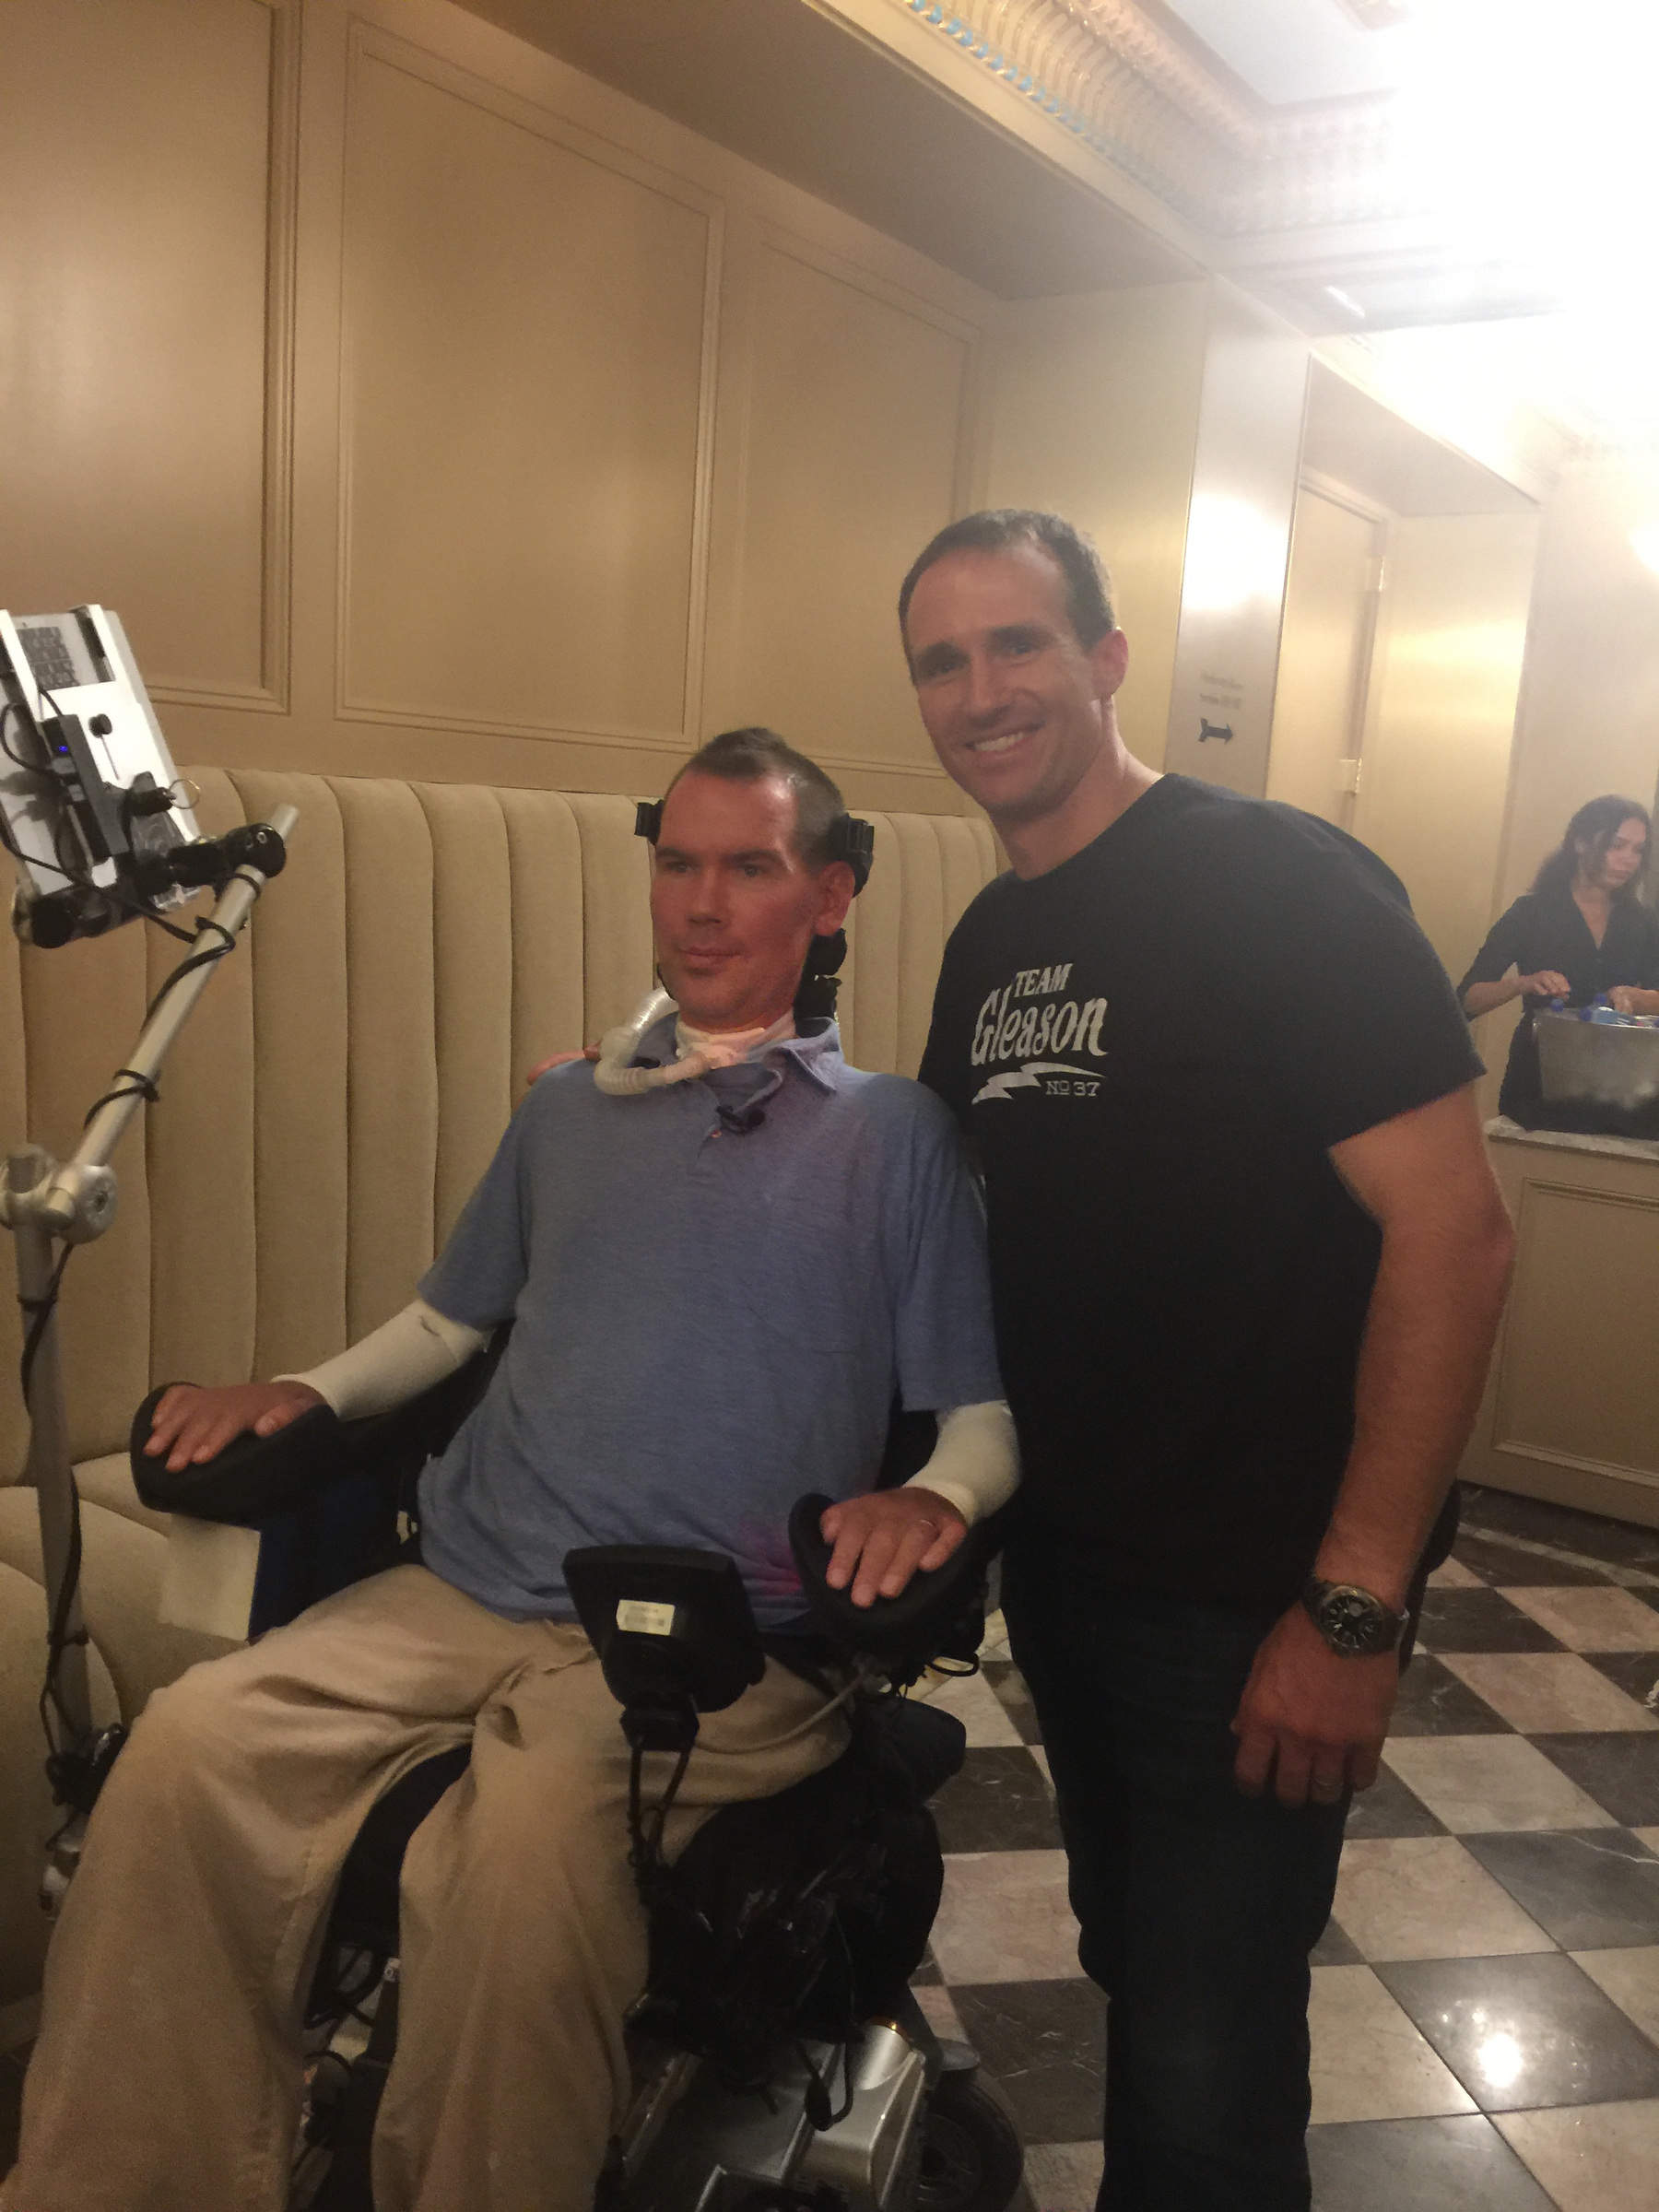 Ex-NFL player, now with ALS, exhorts: 'Relentlessly seek your